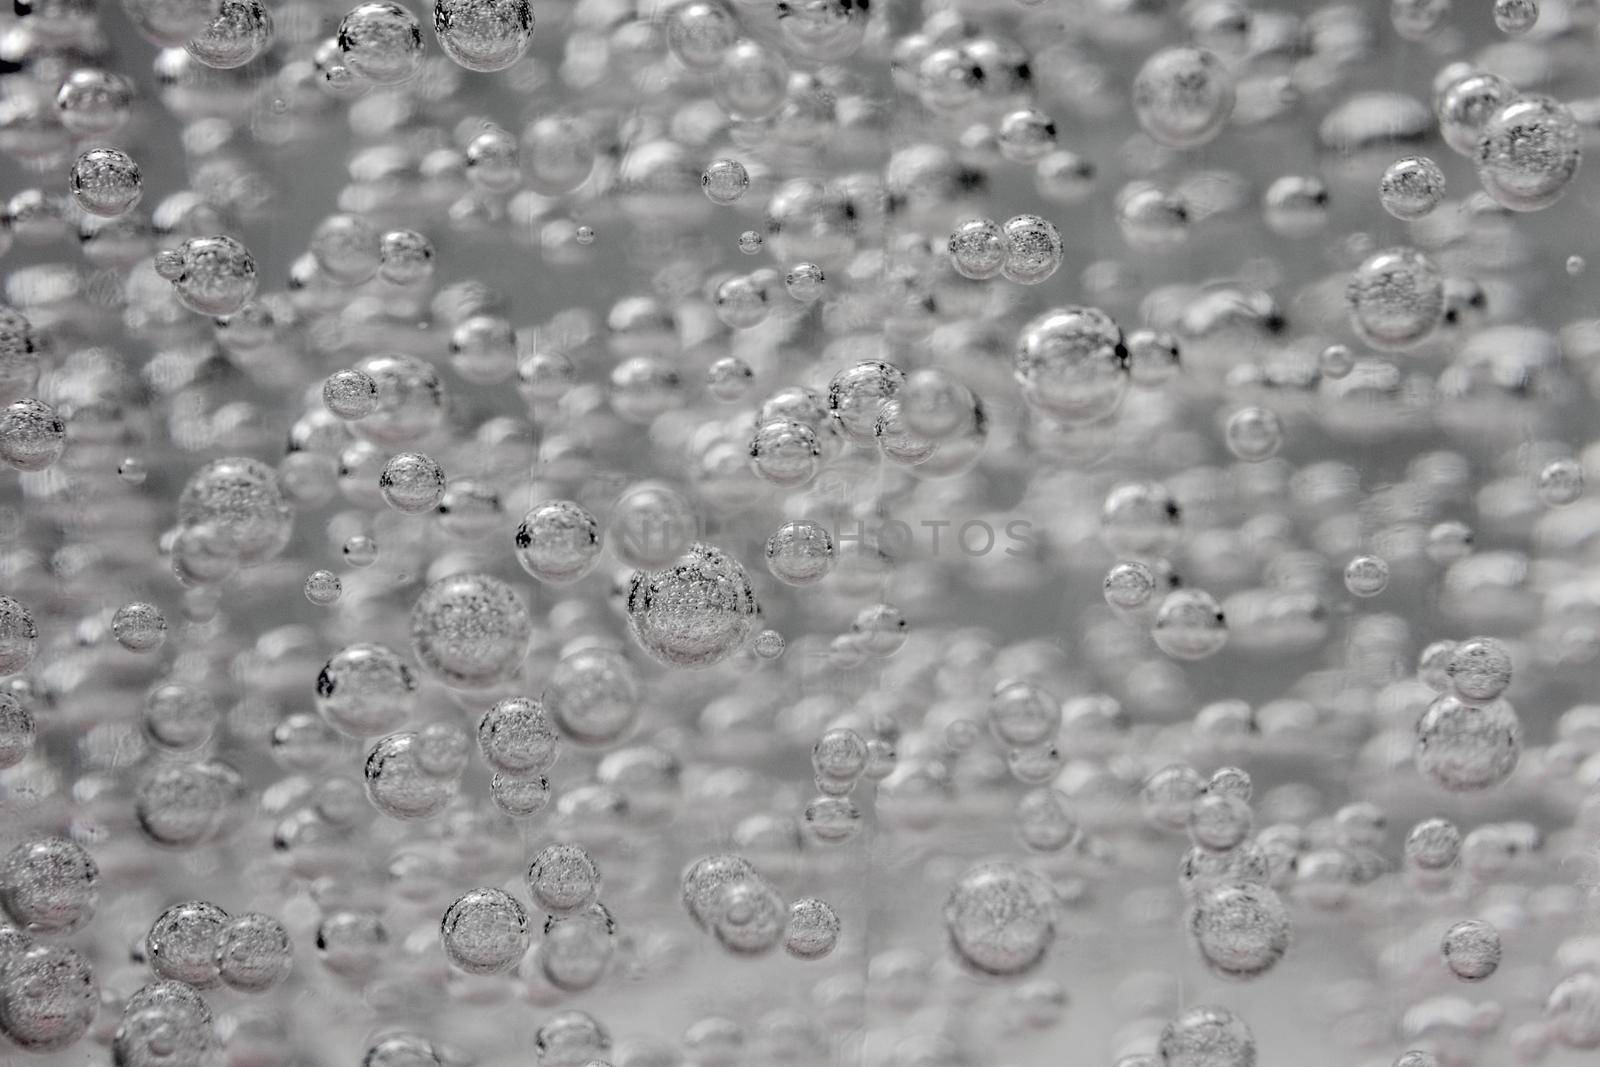 air bubbles in blue shampoos as background. High quality photo